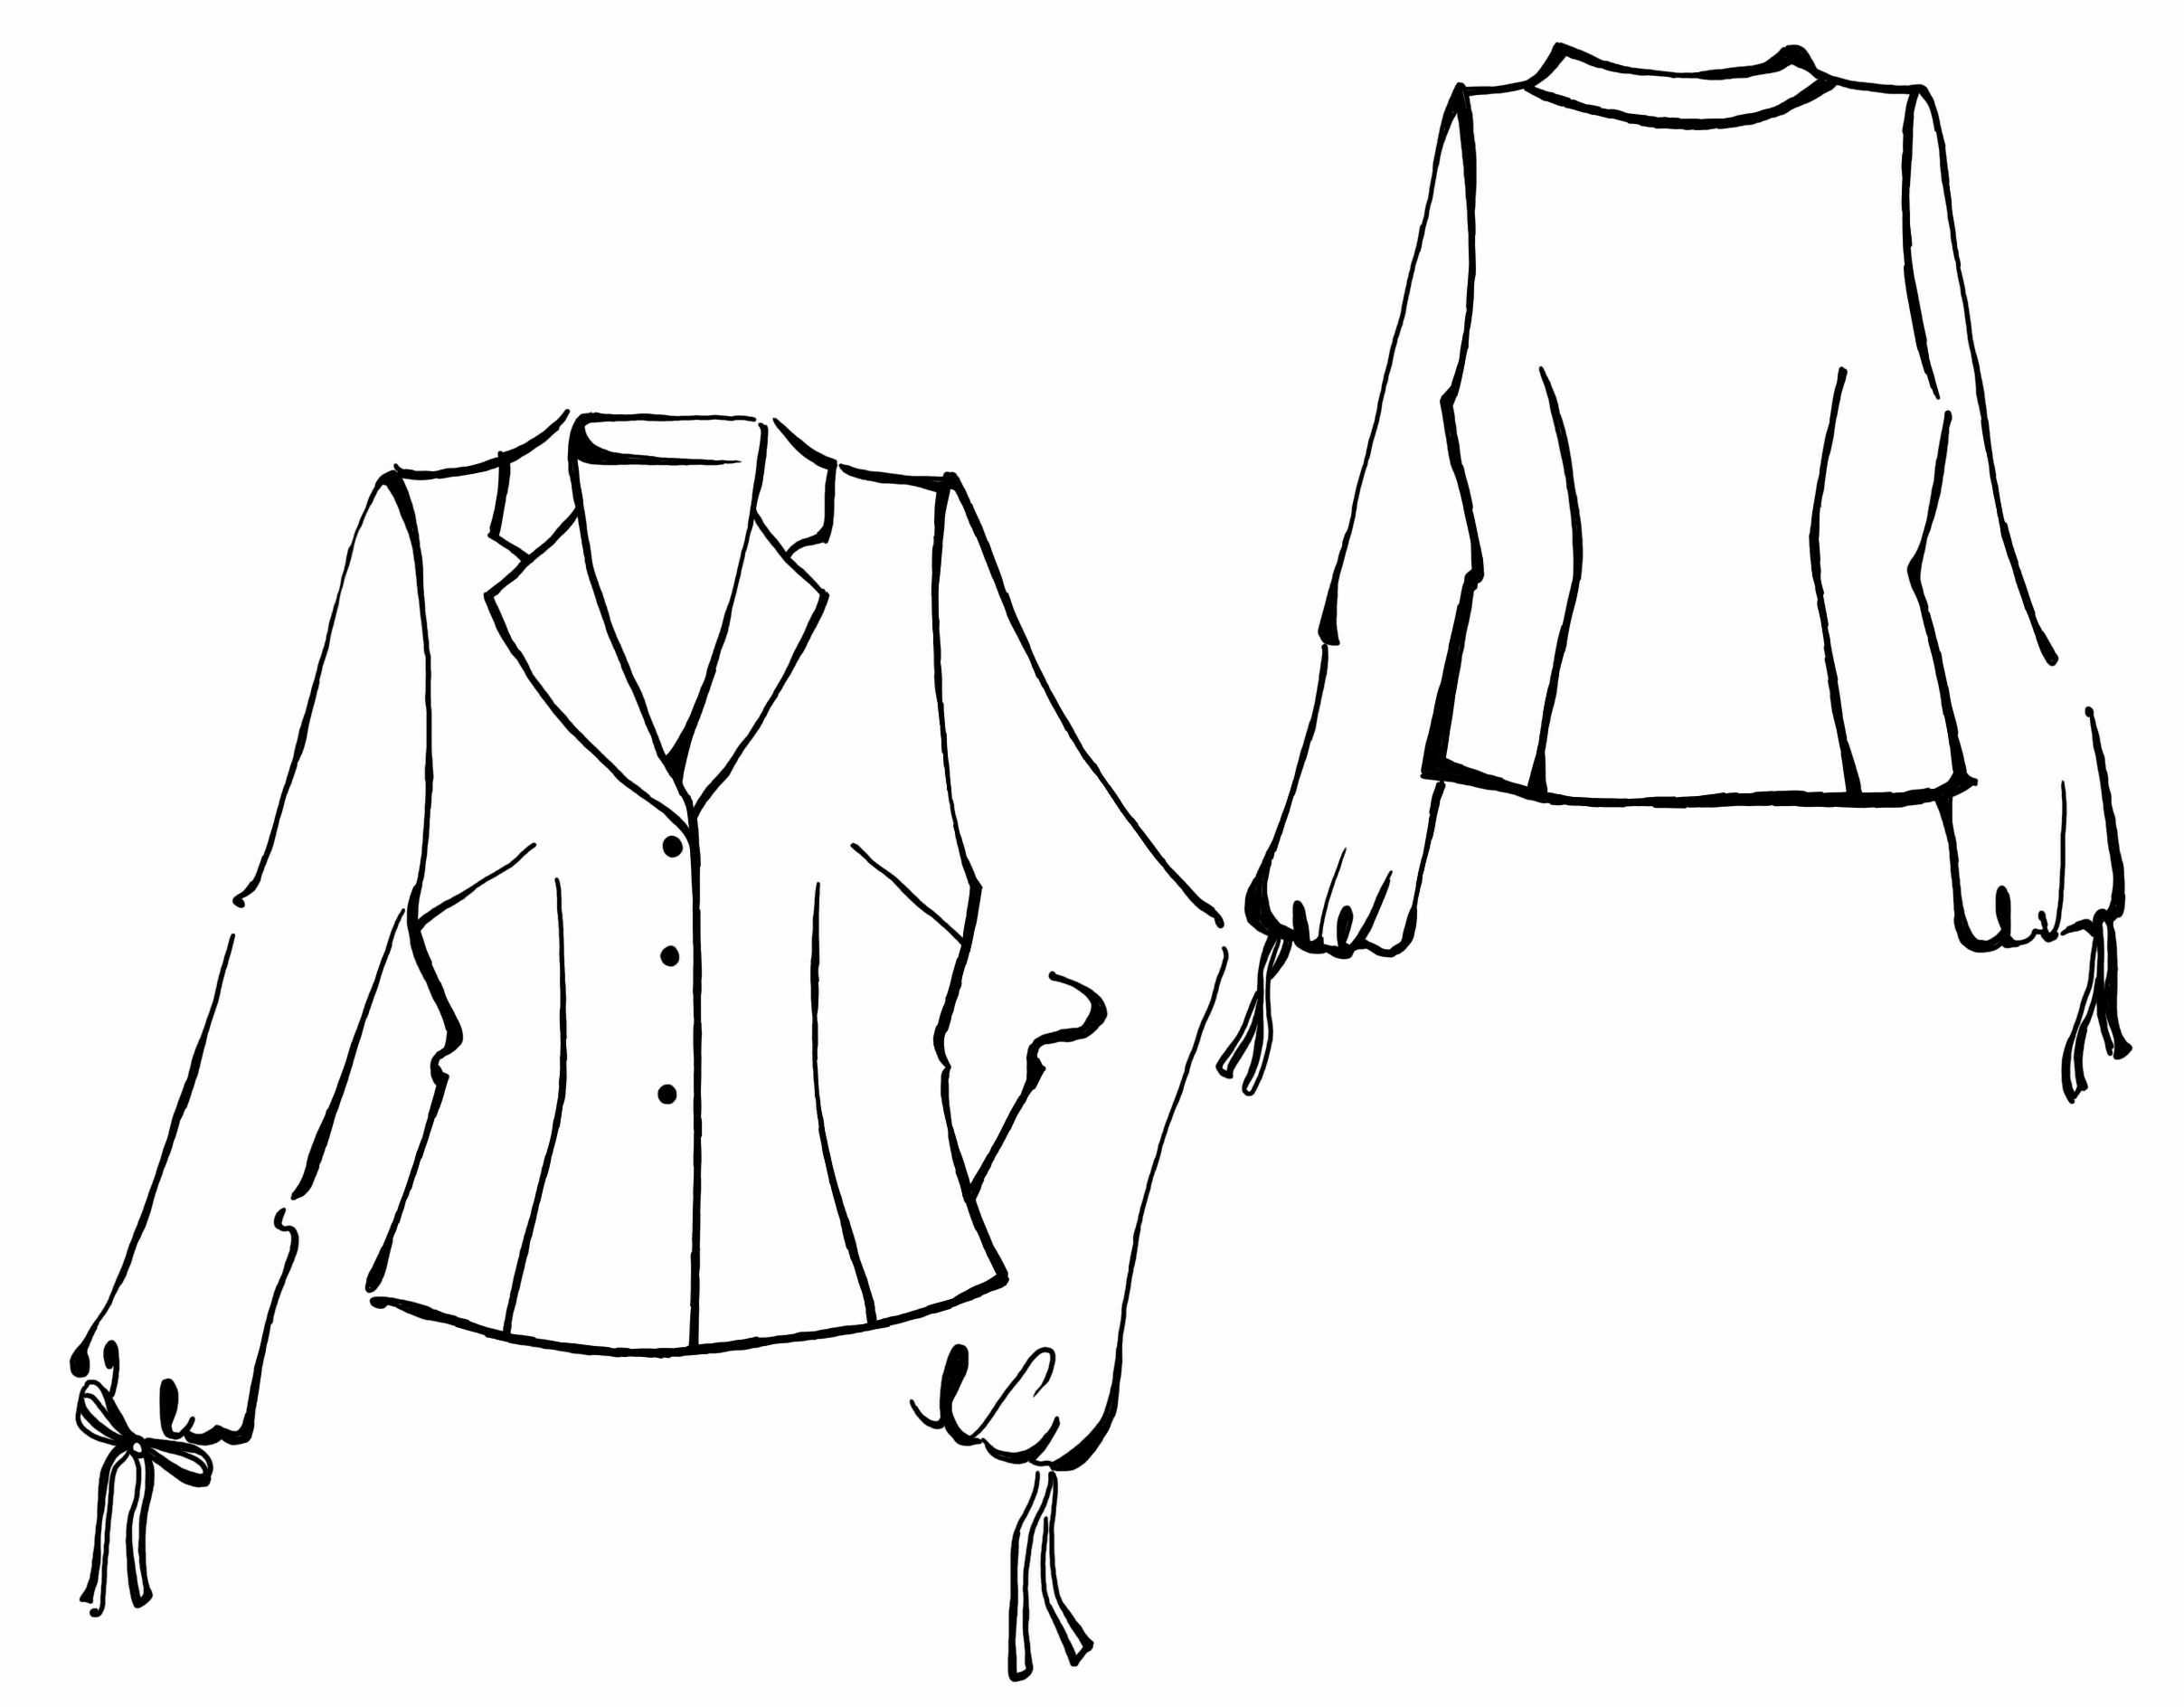 Blouse - Sewing Pattern #5305. Made-to-measure sewing pattern from ...